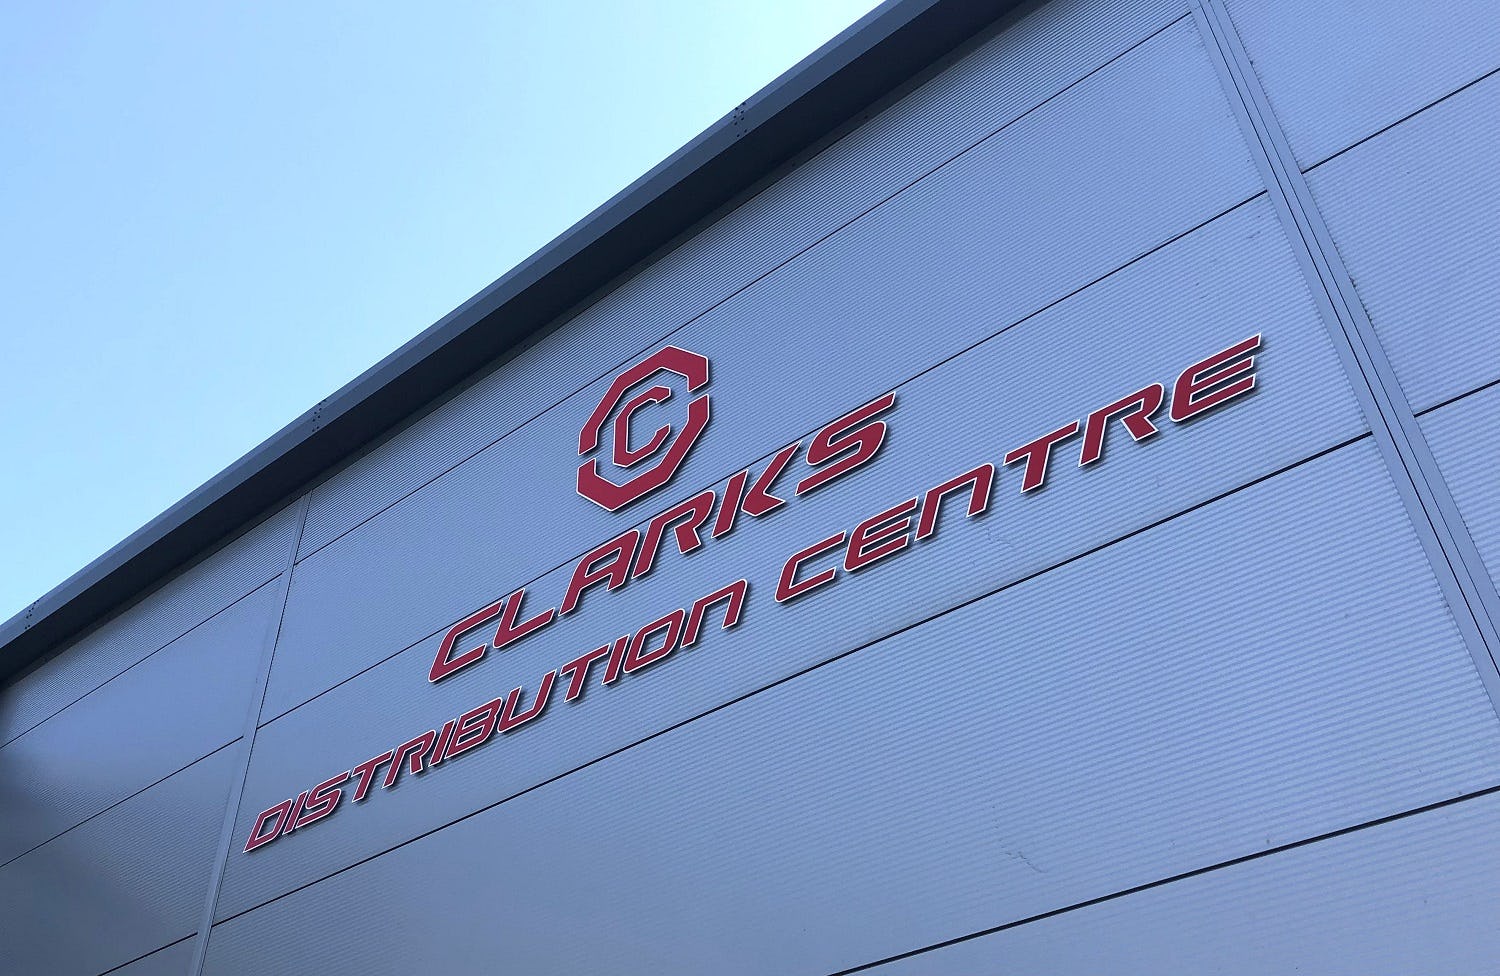 Clarks Systems' New Distribution Centre for Deliveries 24 Hours